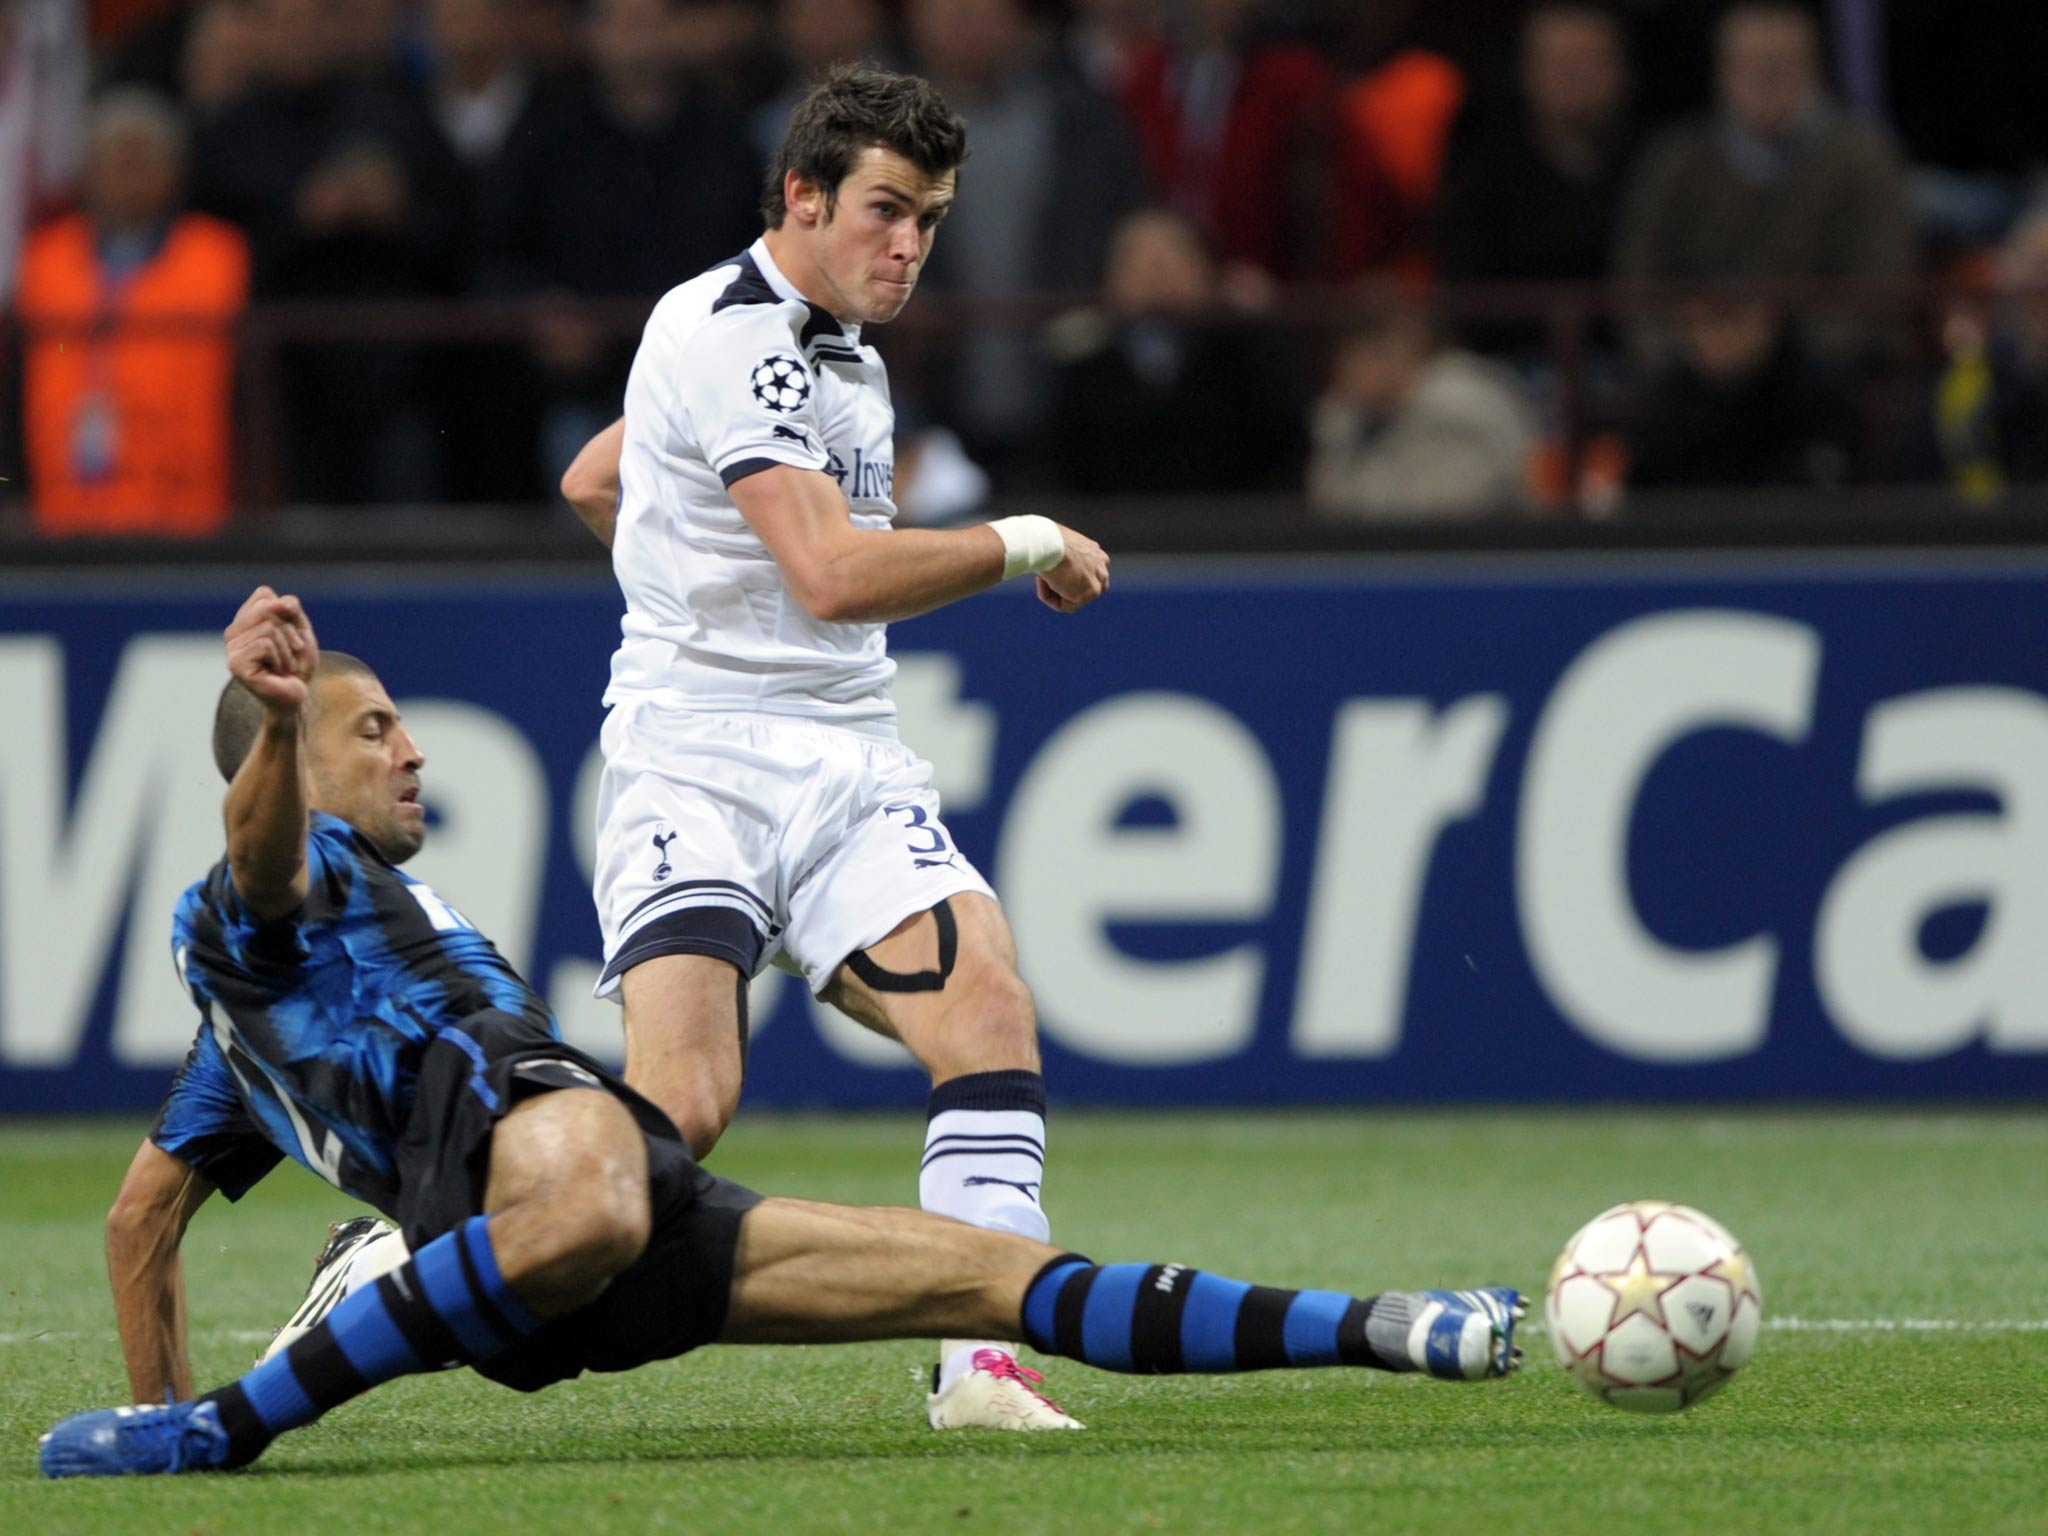 Gareth Bale in action at the San Siro in 2010 where he scored a hat-trick